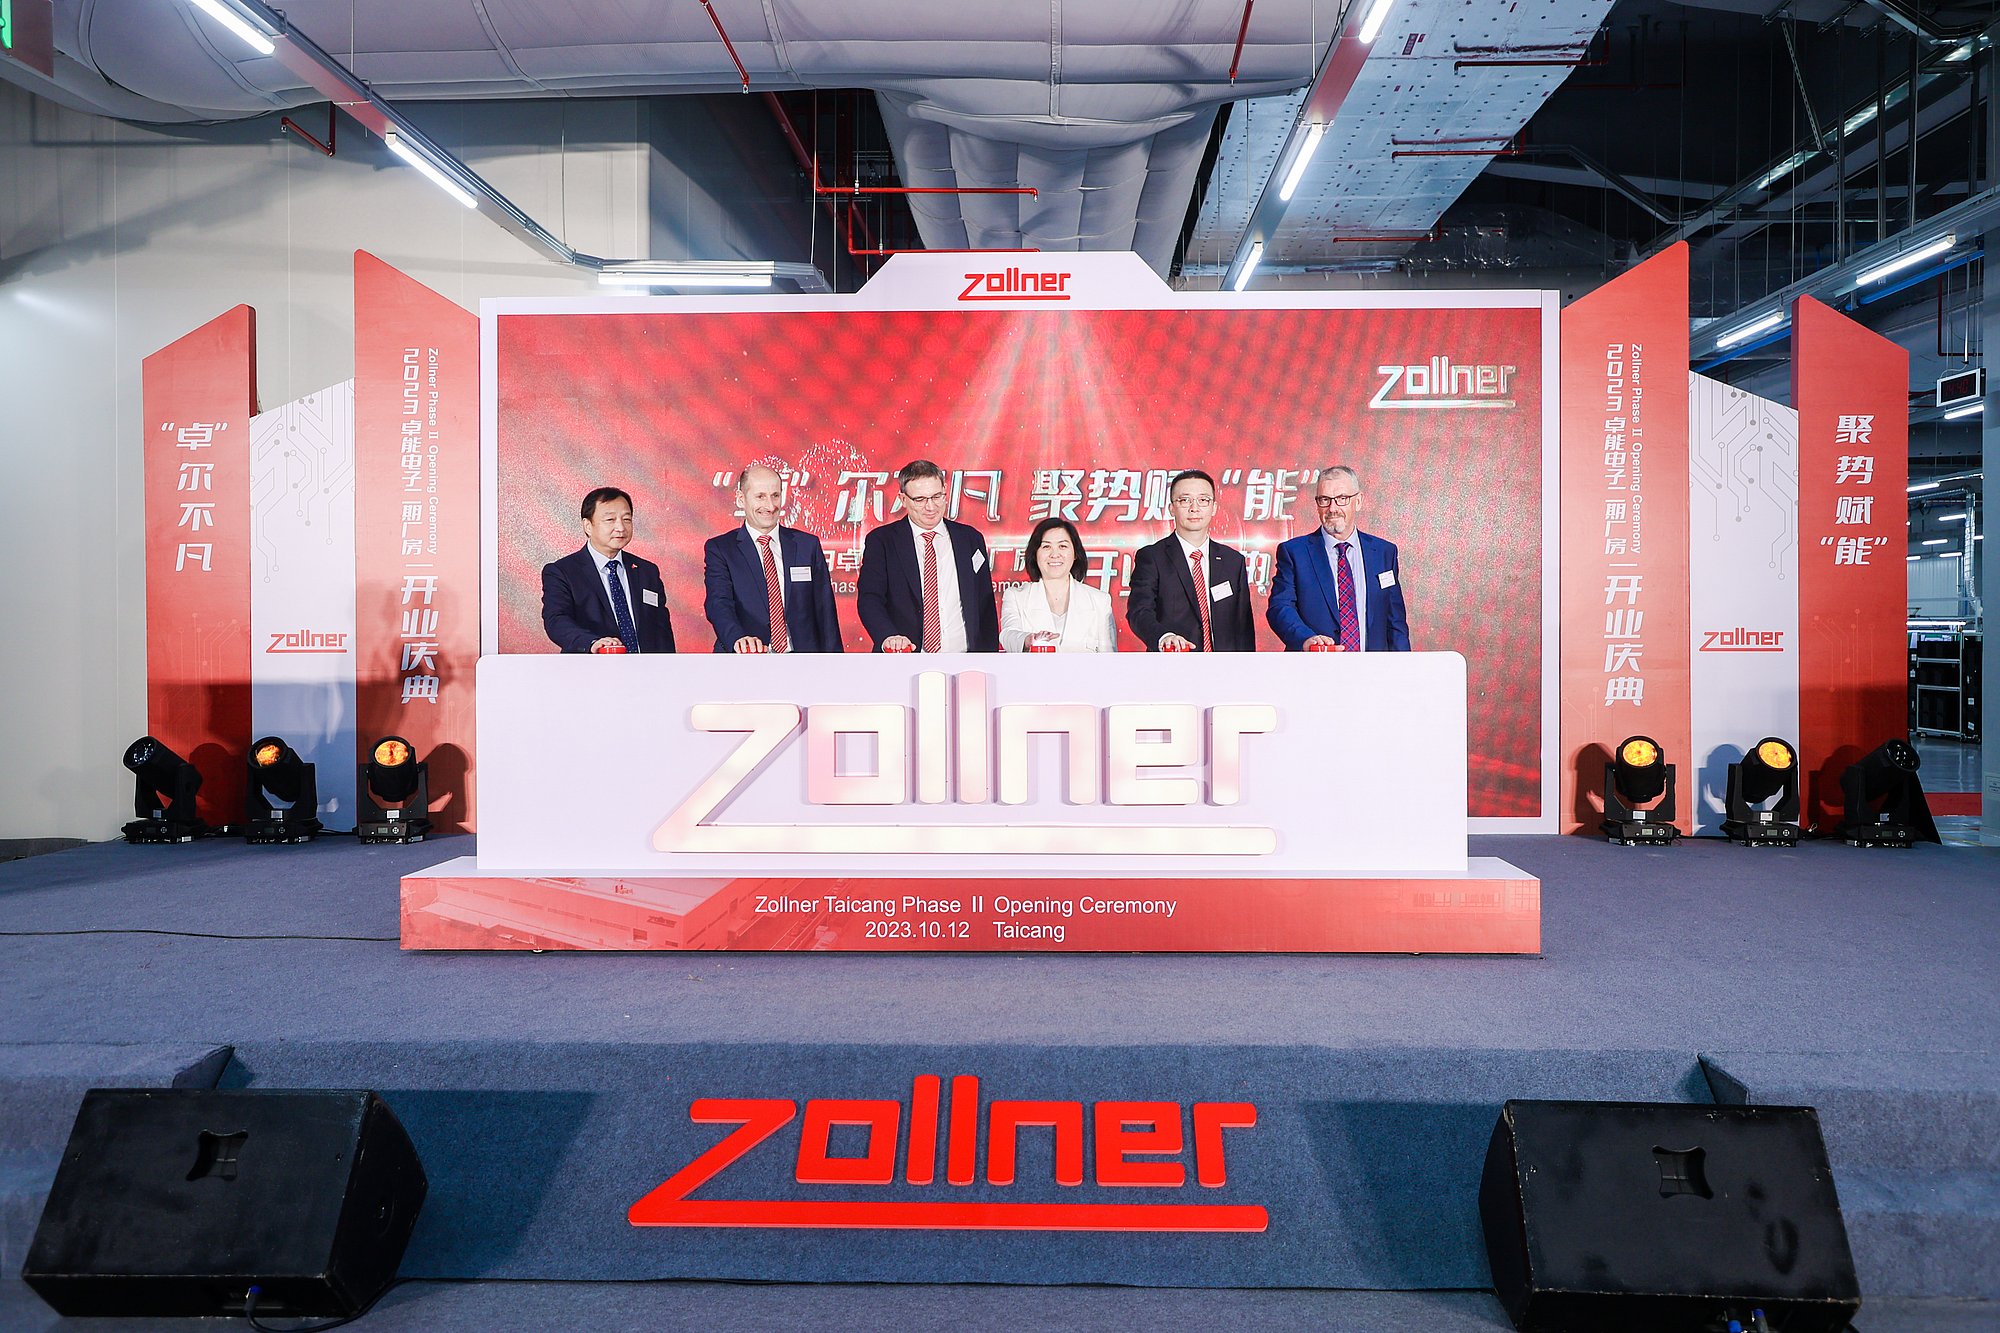 Zollner Elektronik opens the expansion of its plant in Taicang